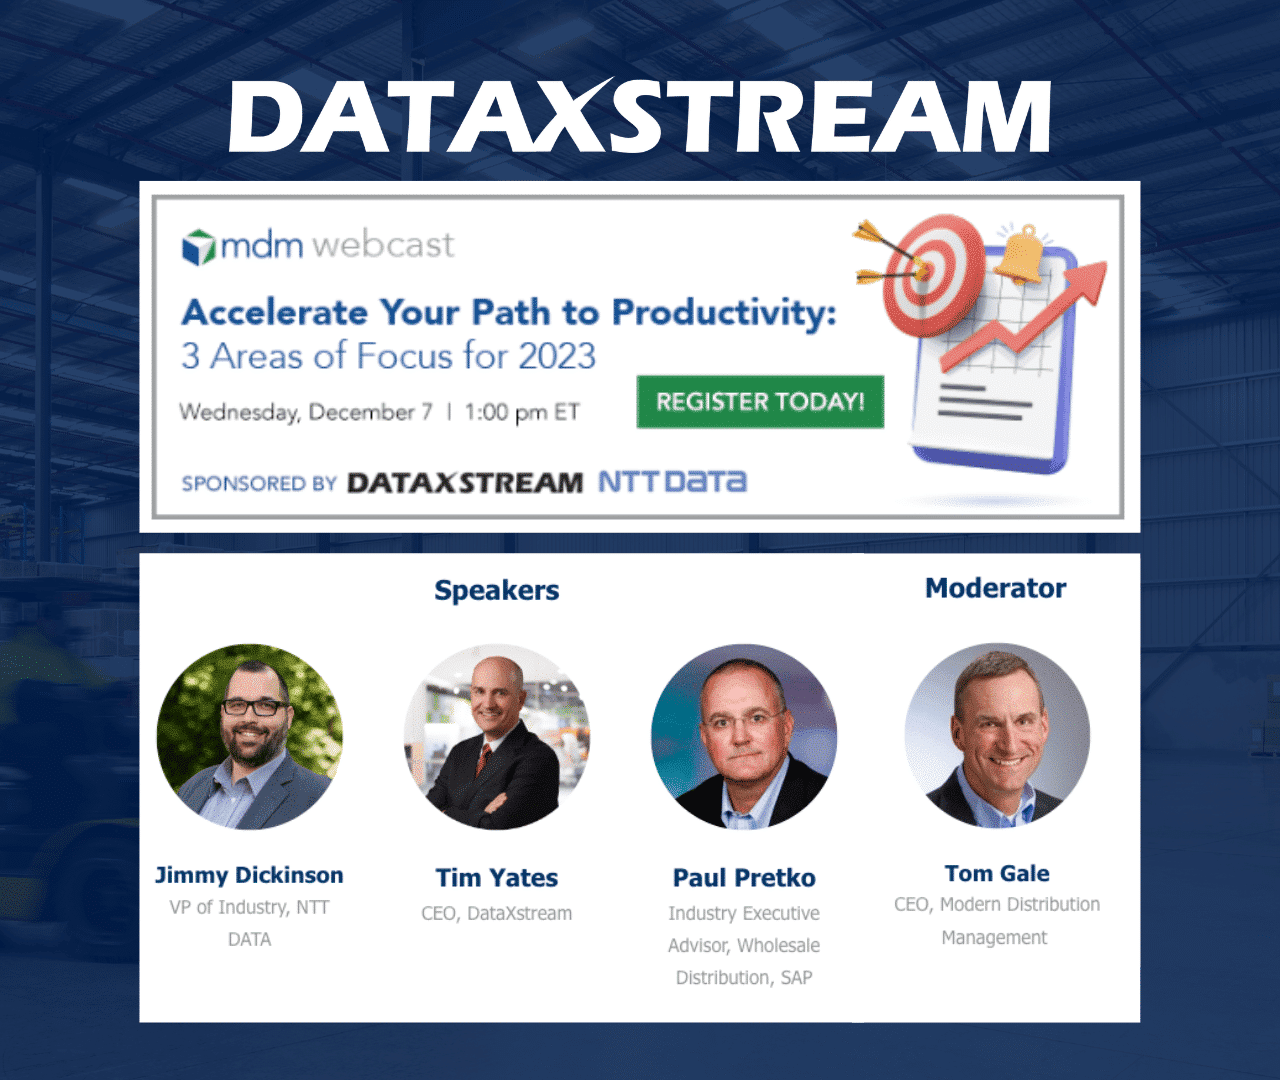 webinar promotion Accelerate Your Path to Productivity with headshots of speakers: Jimmy Dickinson, Tim Yates, Paul Pretko and Tom Gale